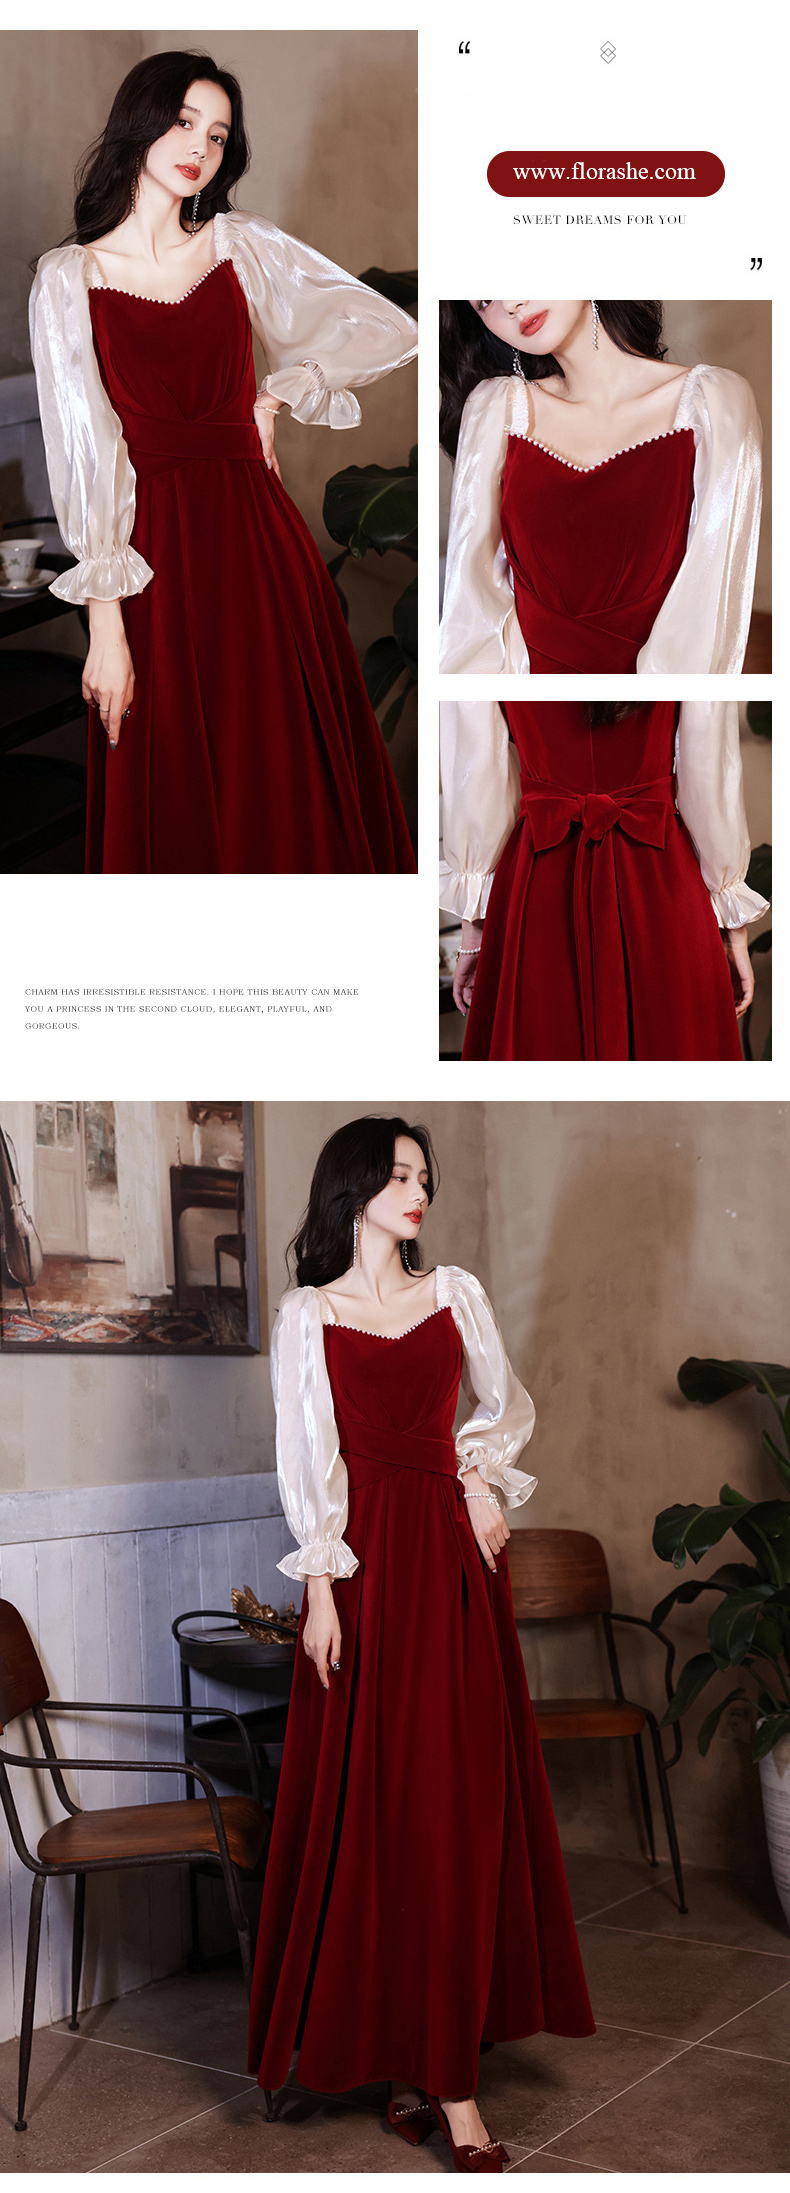 Velour Long Sleeve Wine Red Evening Dress Party Gown12